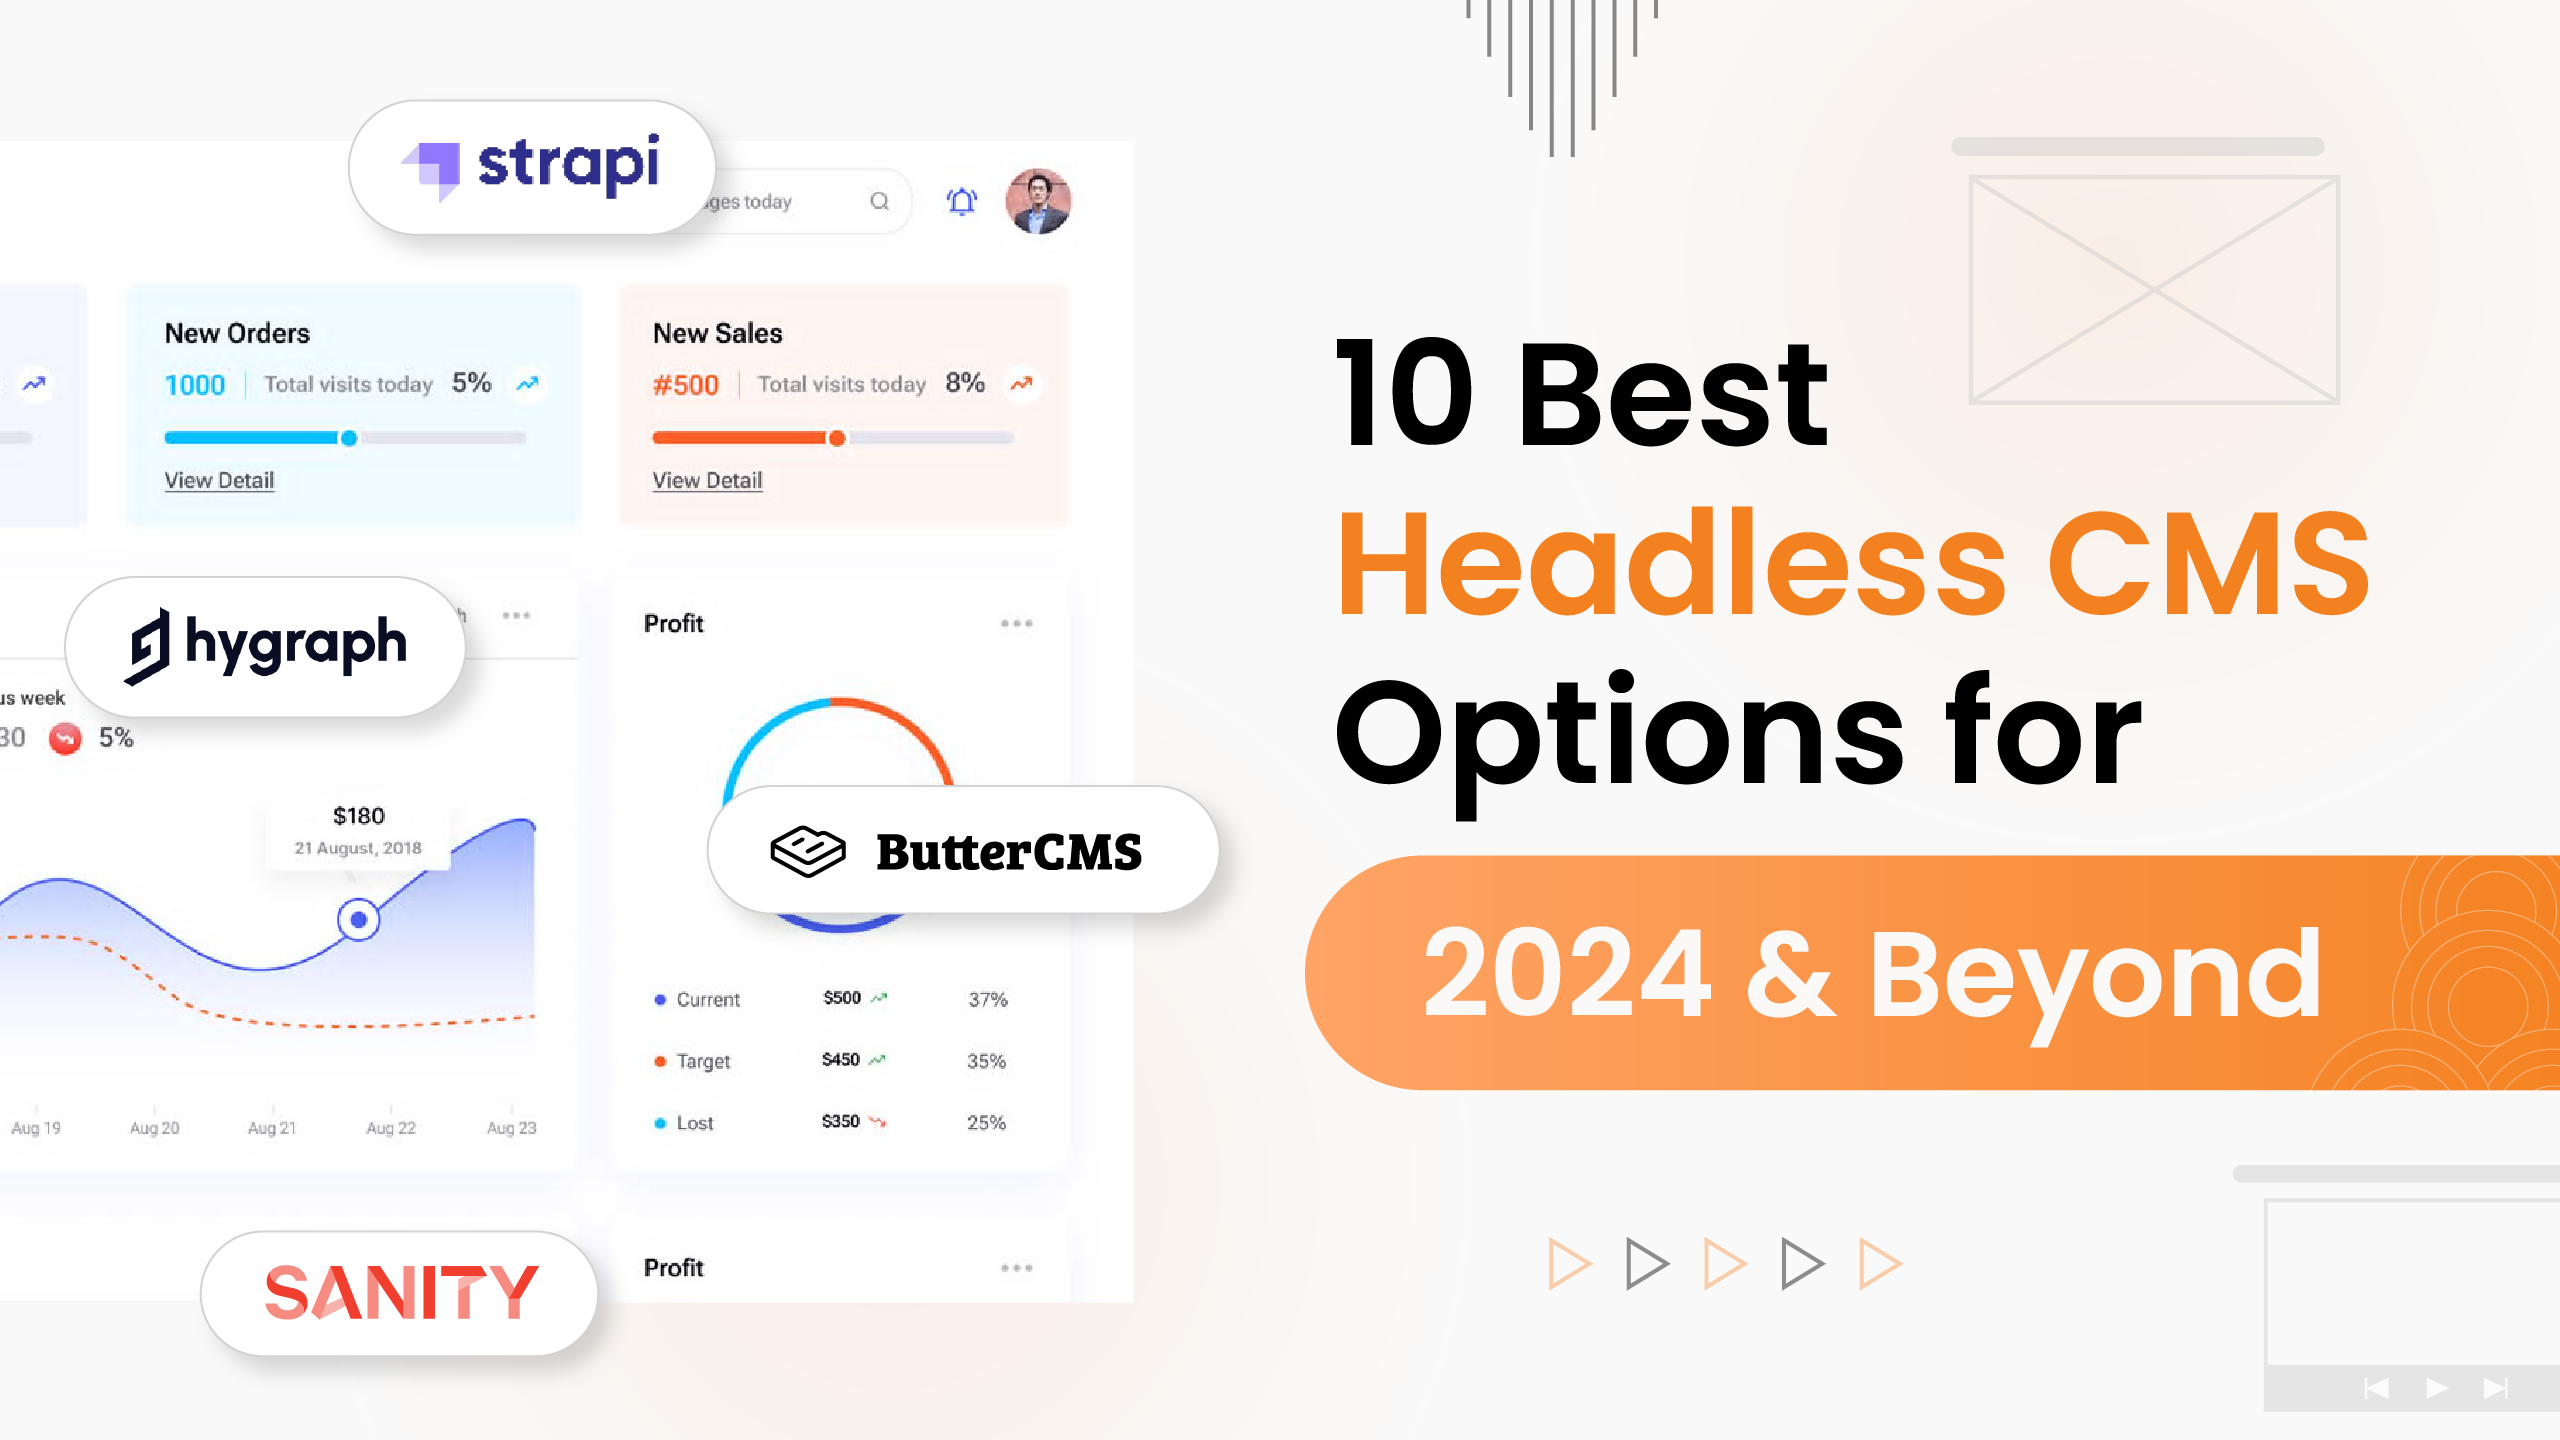 10 Best Headless CMS Options for 2024 and Beyond